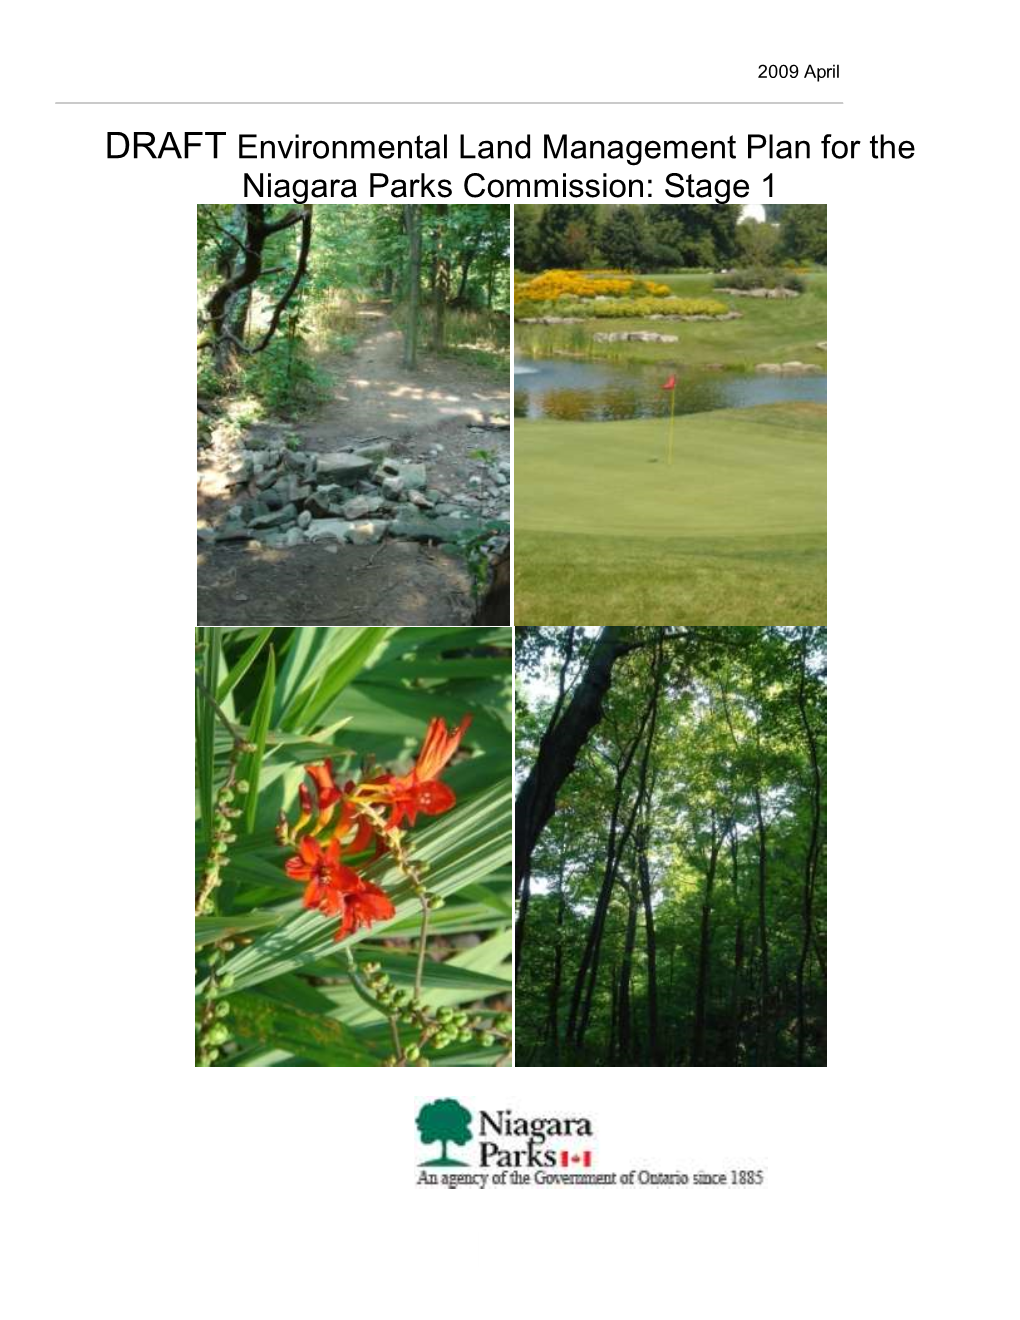 DRAFT Environmental Land Management Plan for the Niagara Parks Commission: Stage 1